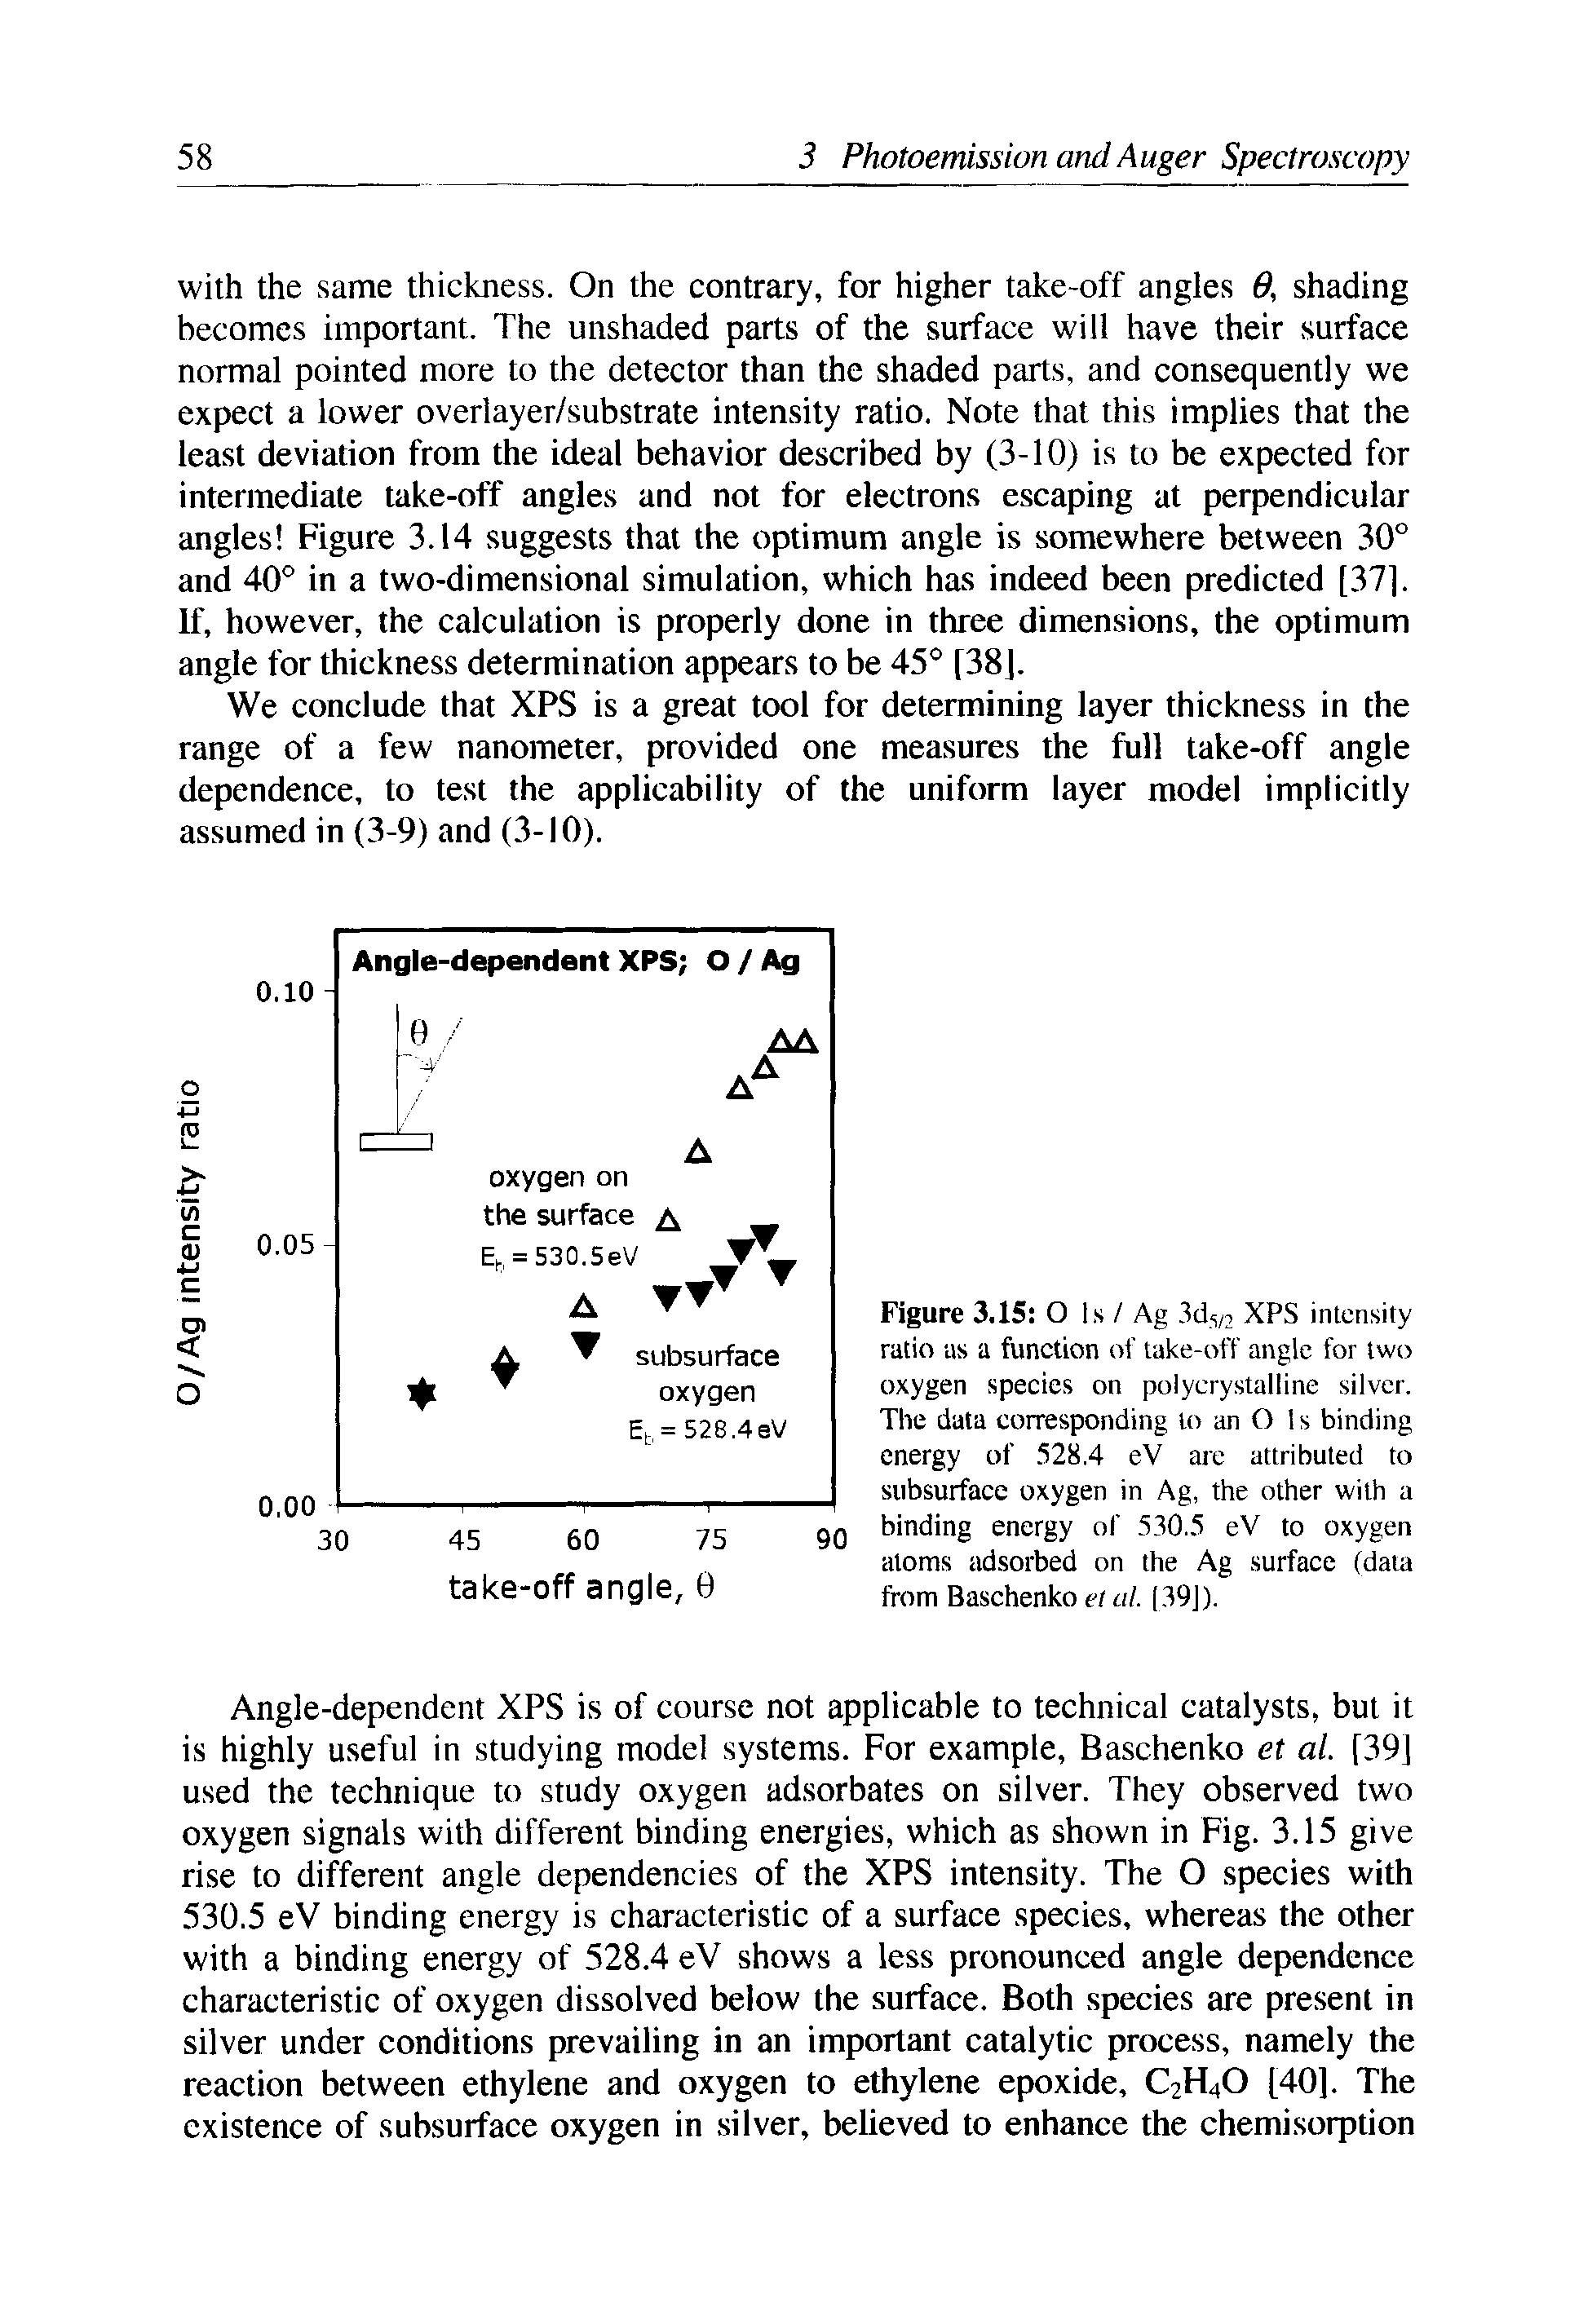 Figure 3.15 O Is / Ag 3d5/2 XPS intensity ratio as a function of take-off angle for two oxygen species on polycrystalline silver. The data corresponding to an O 1 s binding energy of 528.4 eV are attributed to subsurface oxygen in Ag, the other with a binding energy of 530.5 eV to oxygen atoms adsorbed on the Ag surface (data from Baschenko et al. (39J).